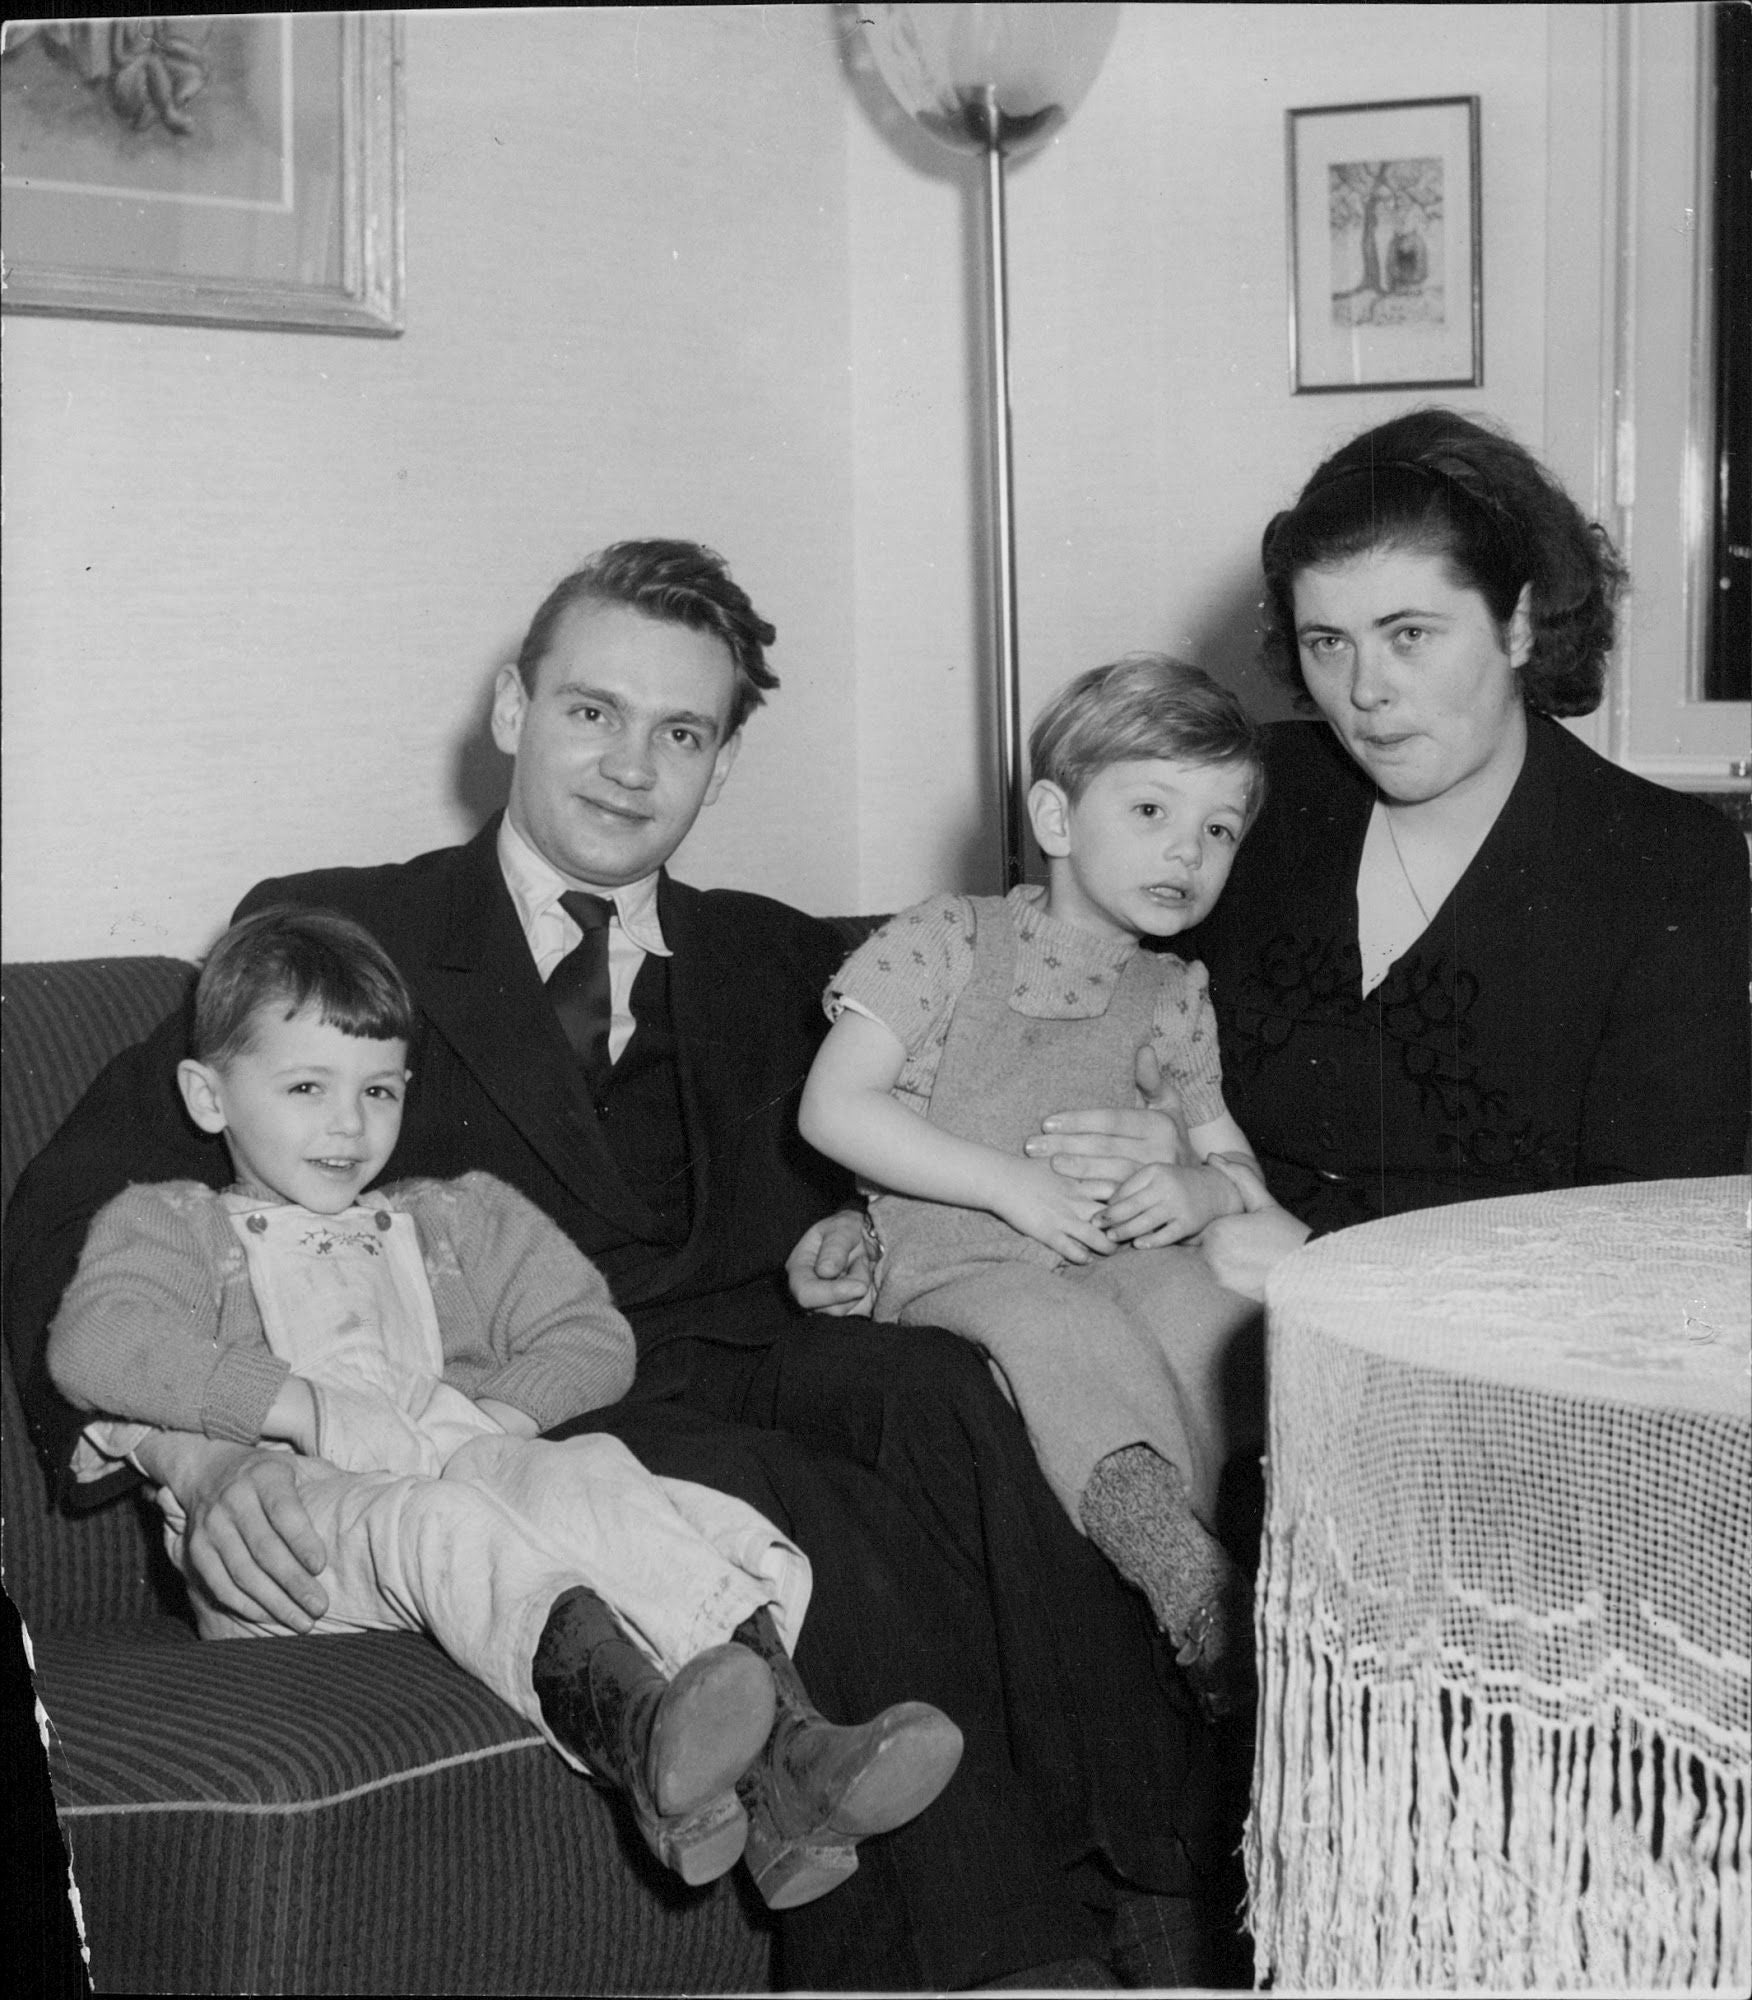 Stig and Anne Marie dagerman with their sons RenÃ© and Rainer - 5 Dece